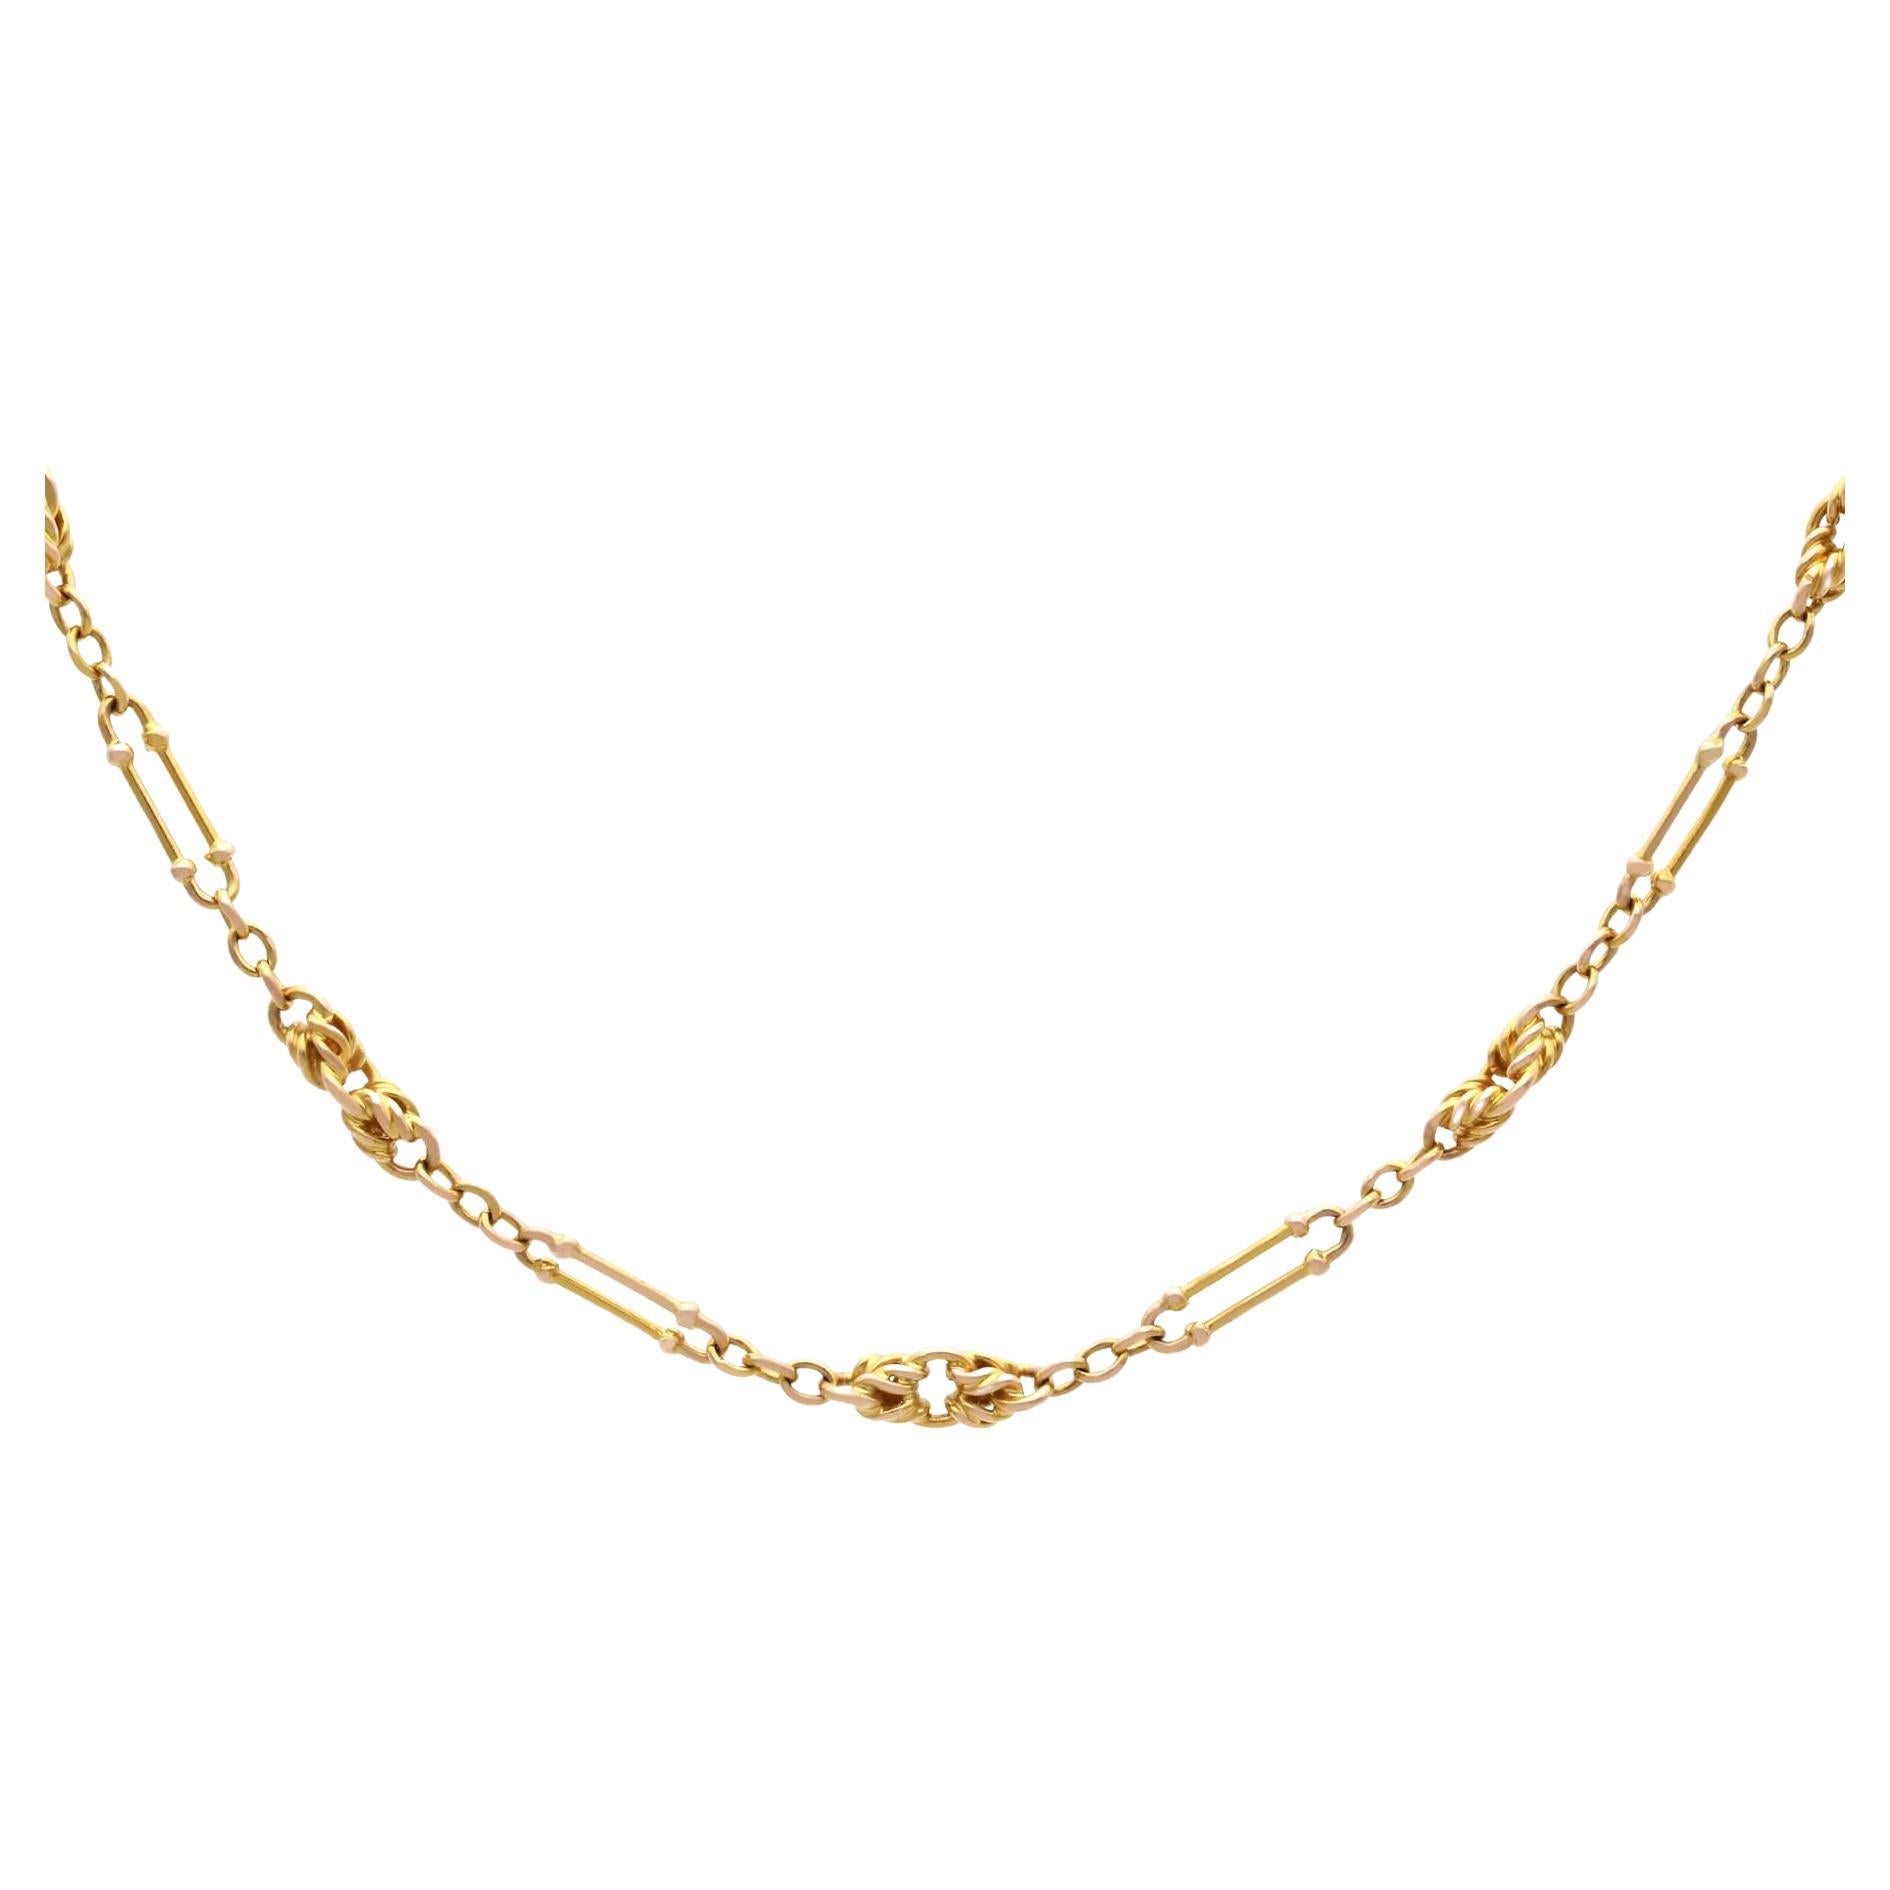 Edwardian 14k Yellow Gold Chain For Sale